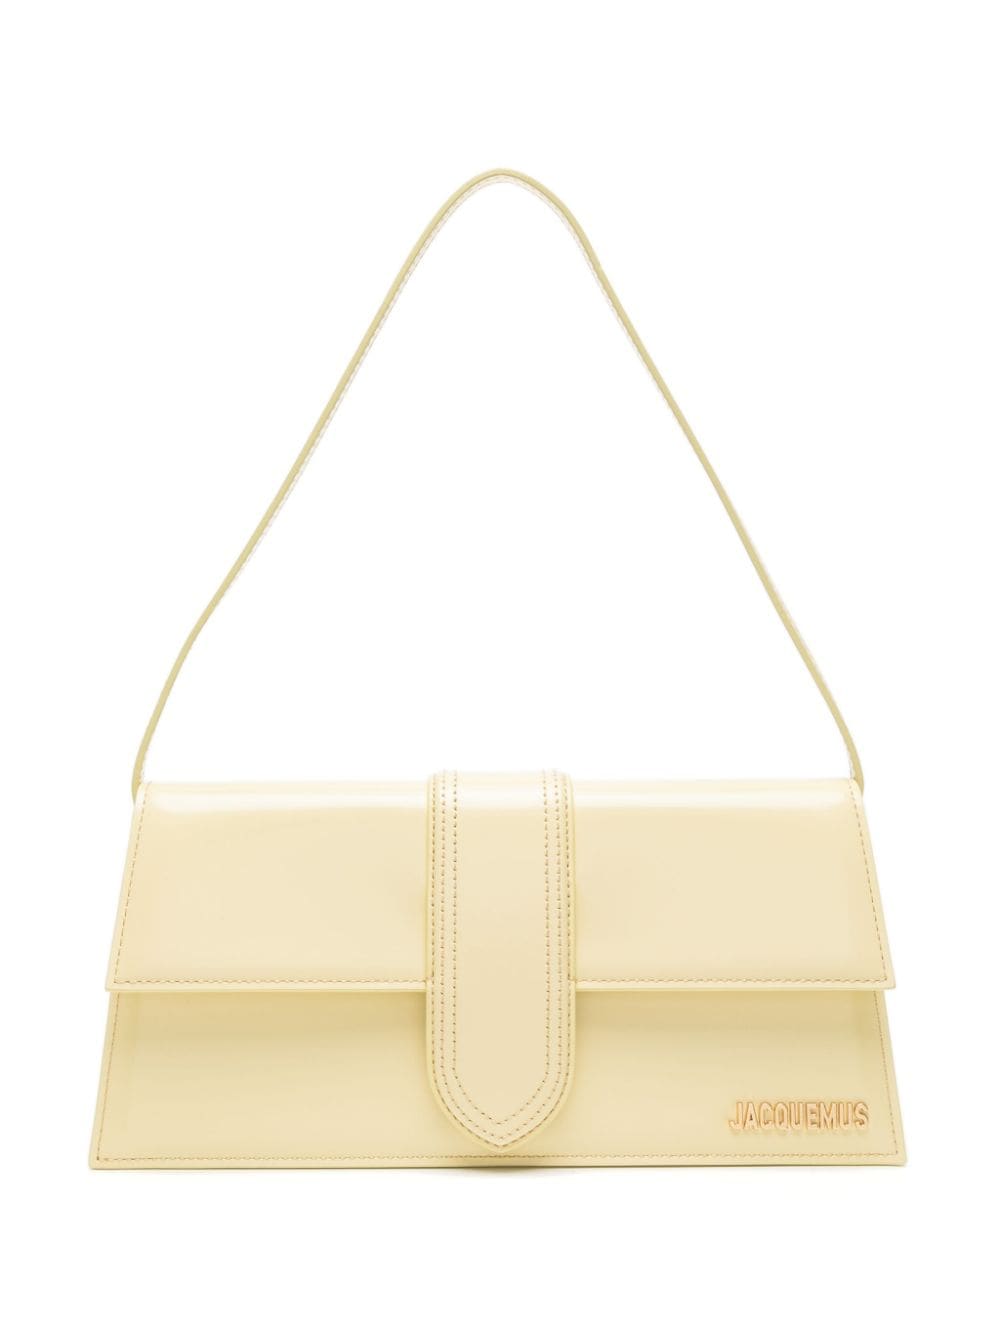 Jacquemus Le Bambino Long Leather Shoulder Bag In Light Yellow